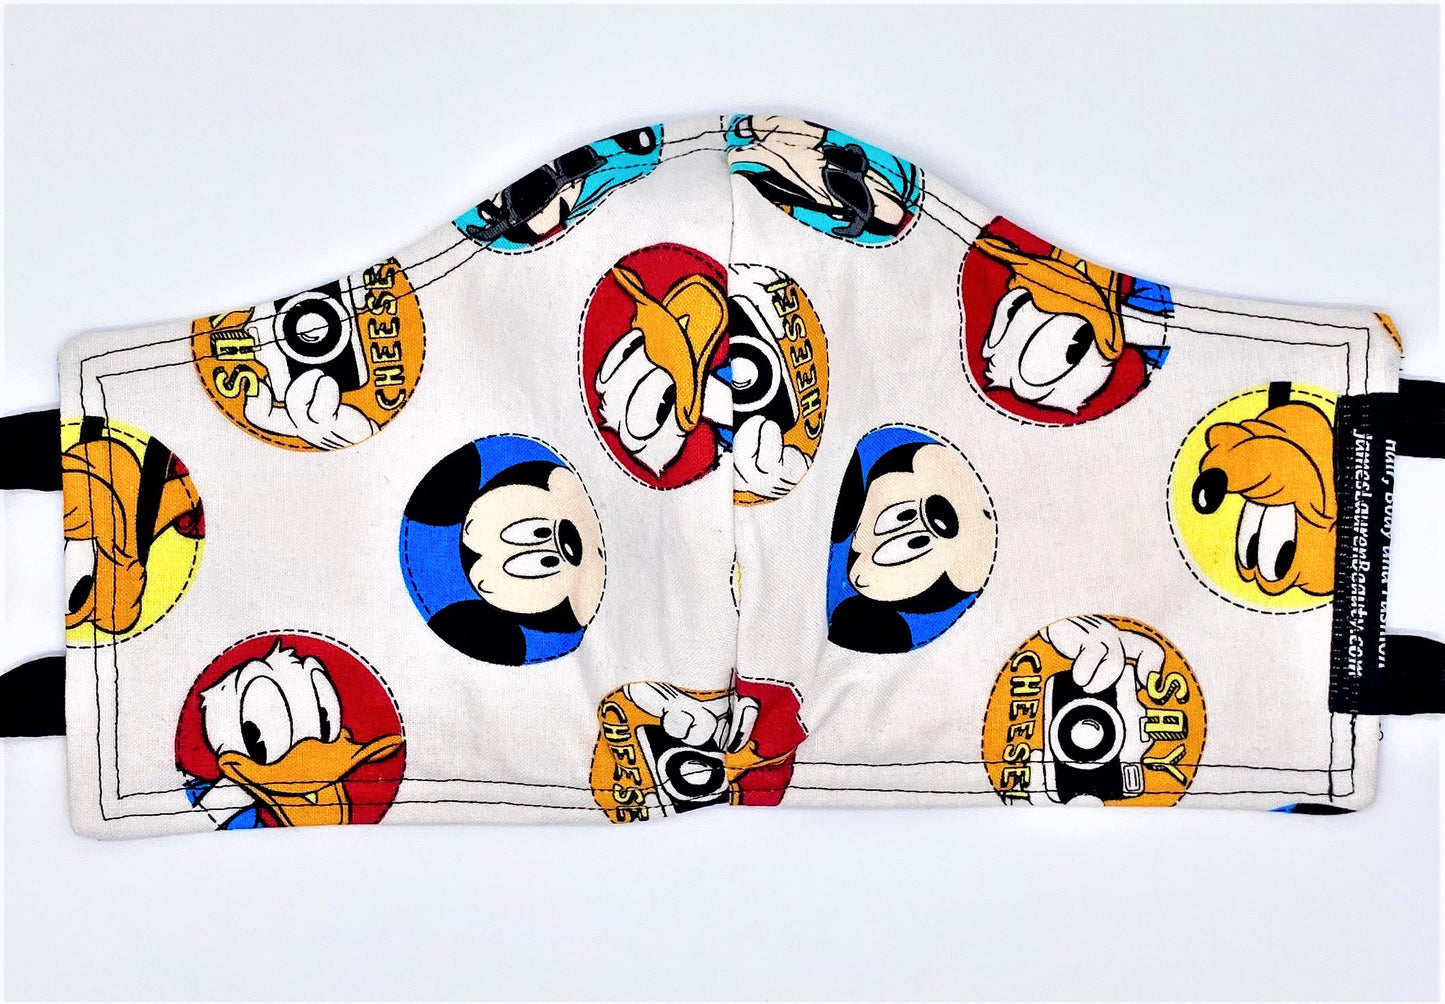 Licensed Prints - Disney "Say Cheese": Contoured Adult Face Masks (One Size Fits Most; Ages 11+)